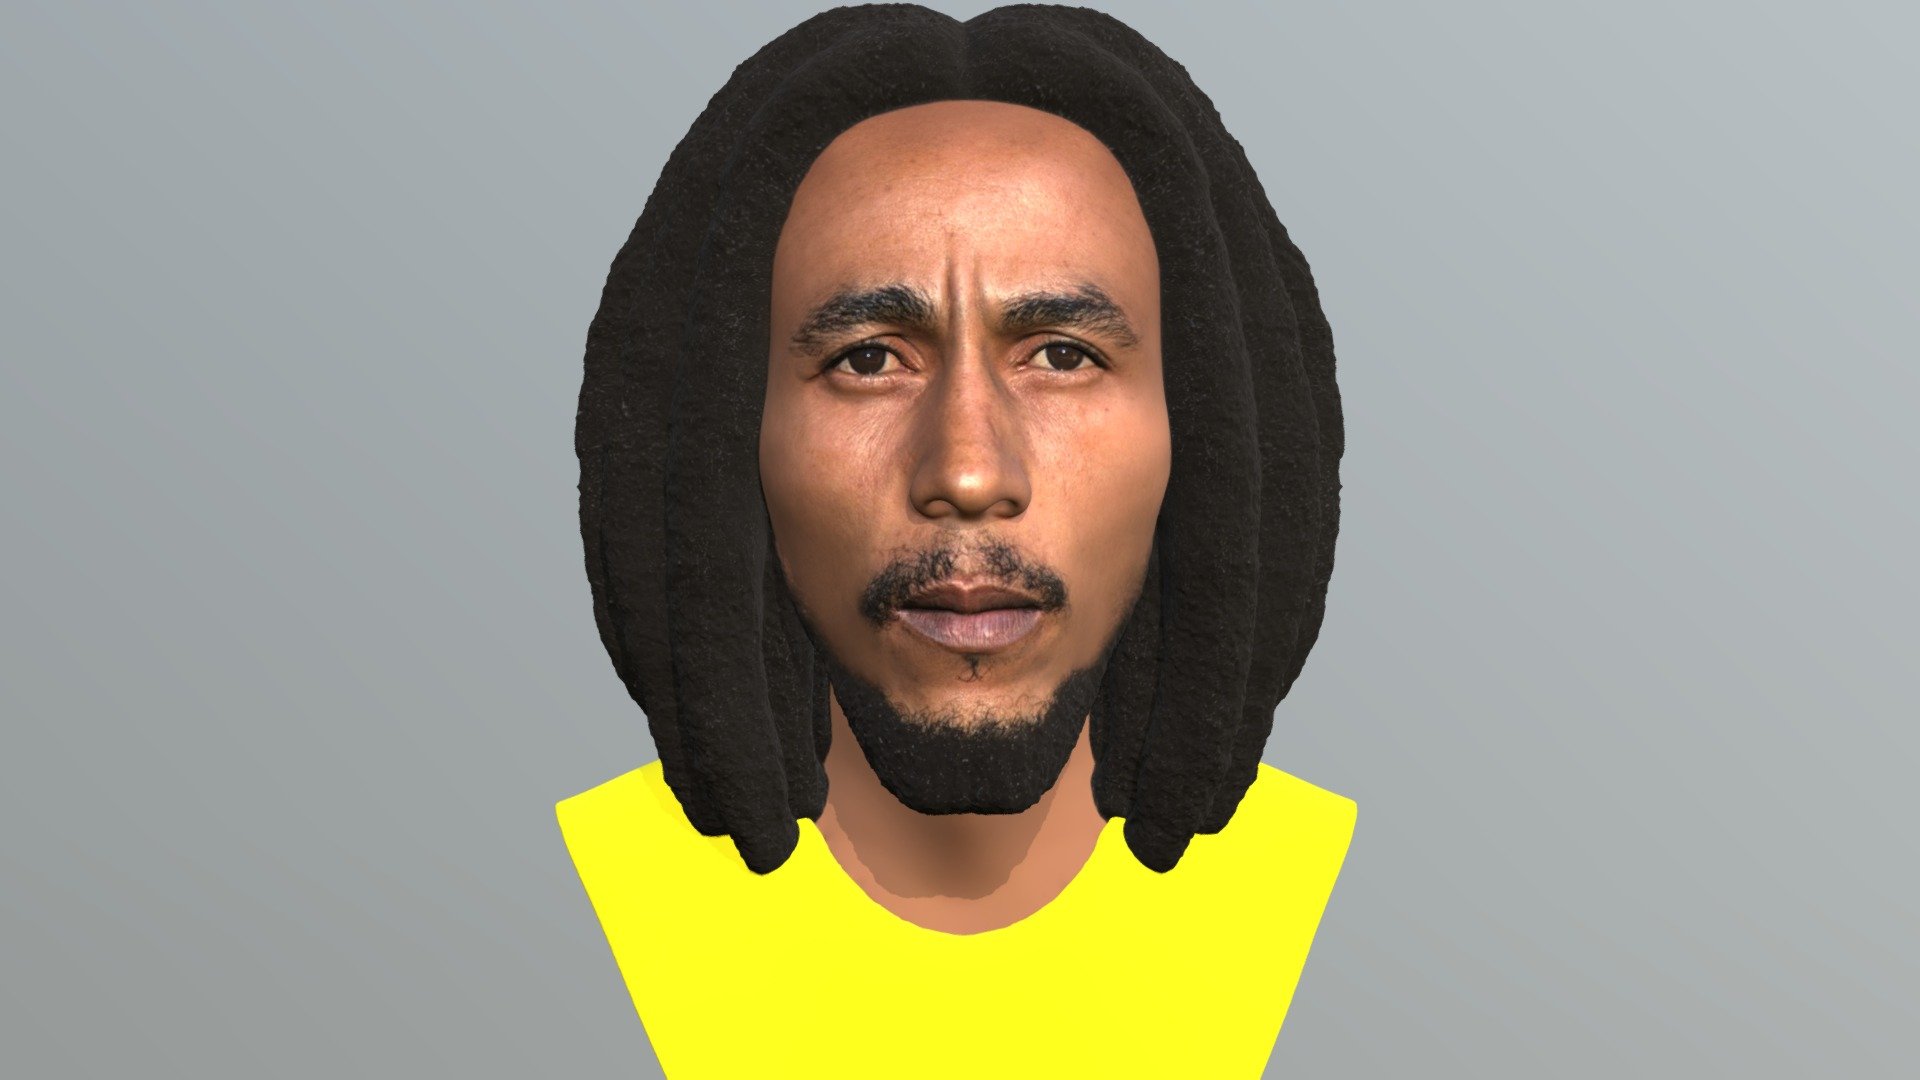 Bob Marley bust for full color 3D printing